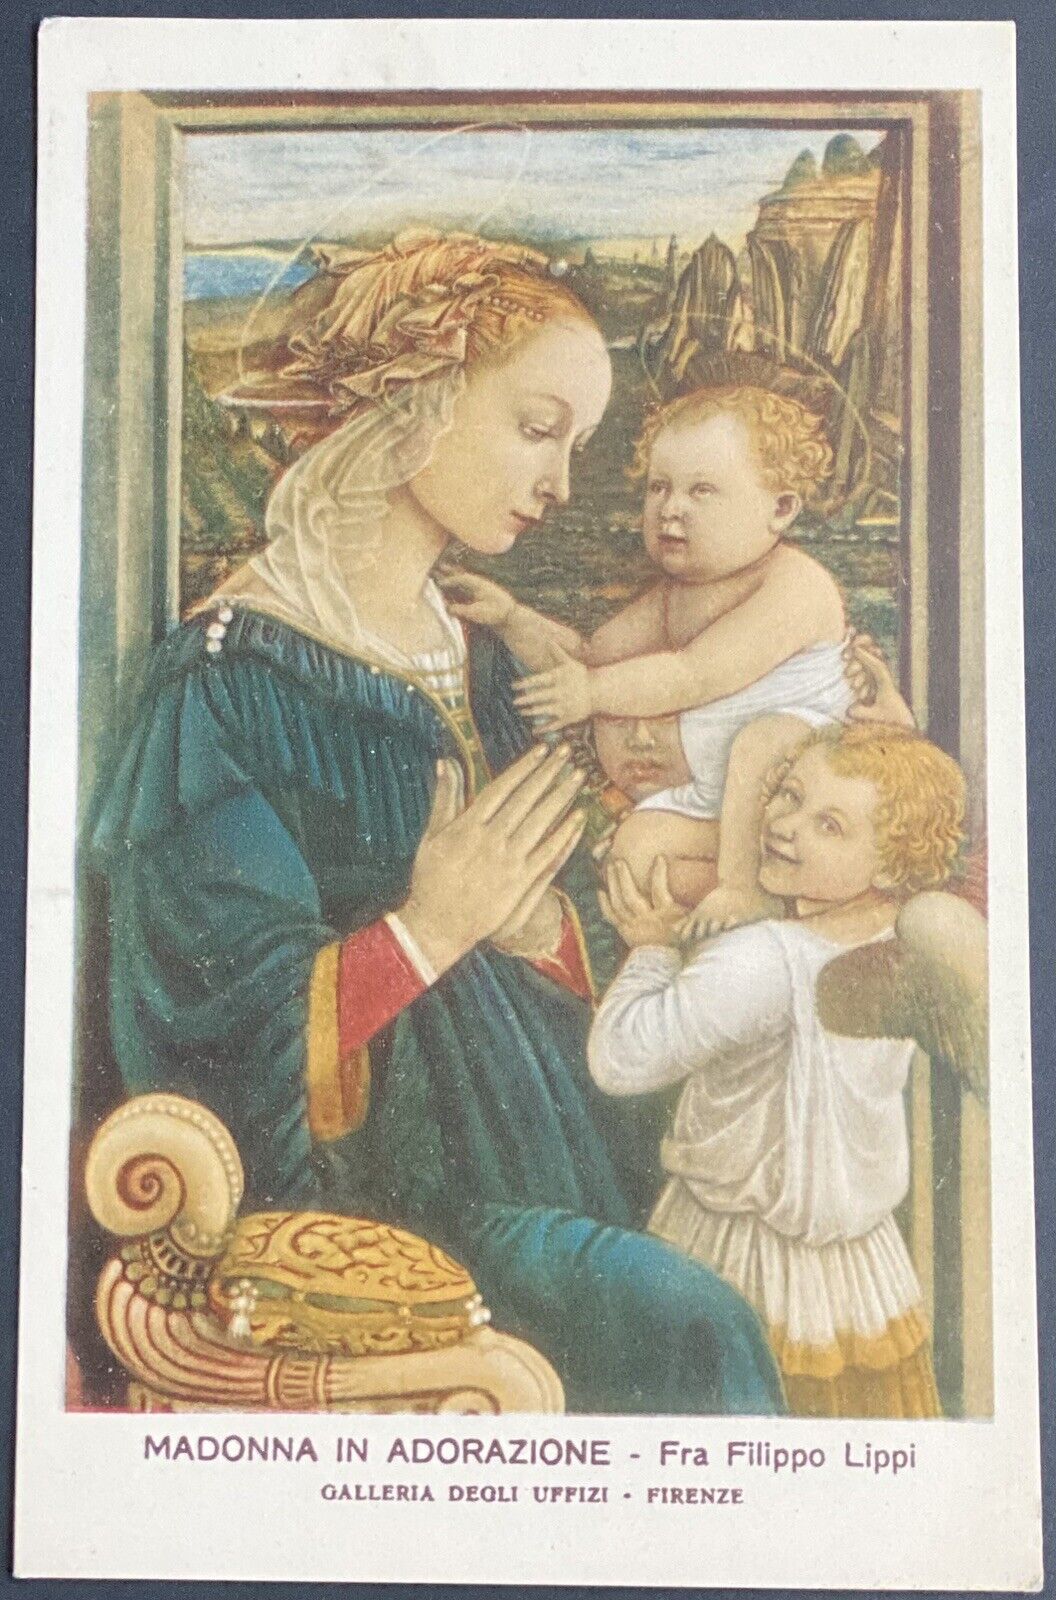 Lot of 5 Vintage Madonna Paintings Postcards - Early 1900s, Italy,  